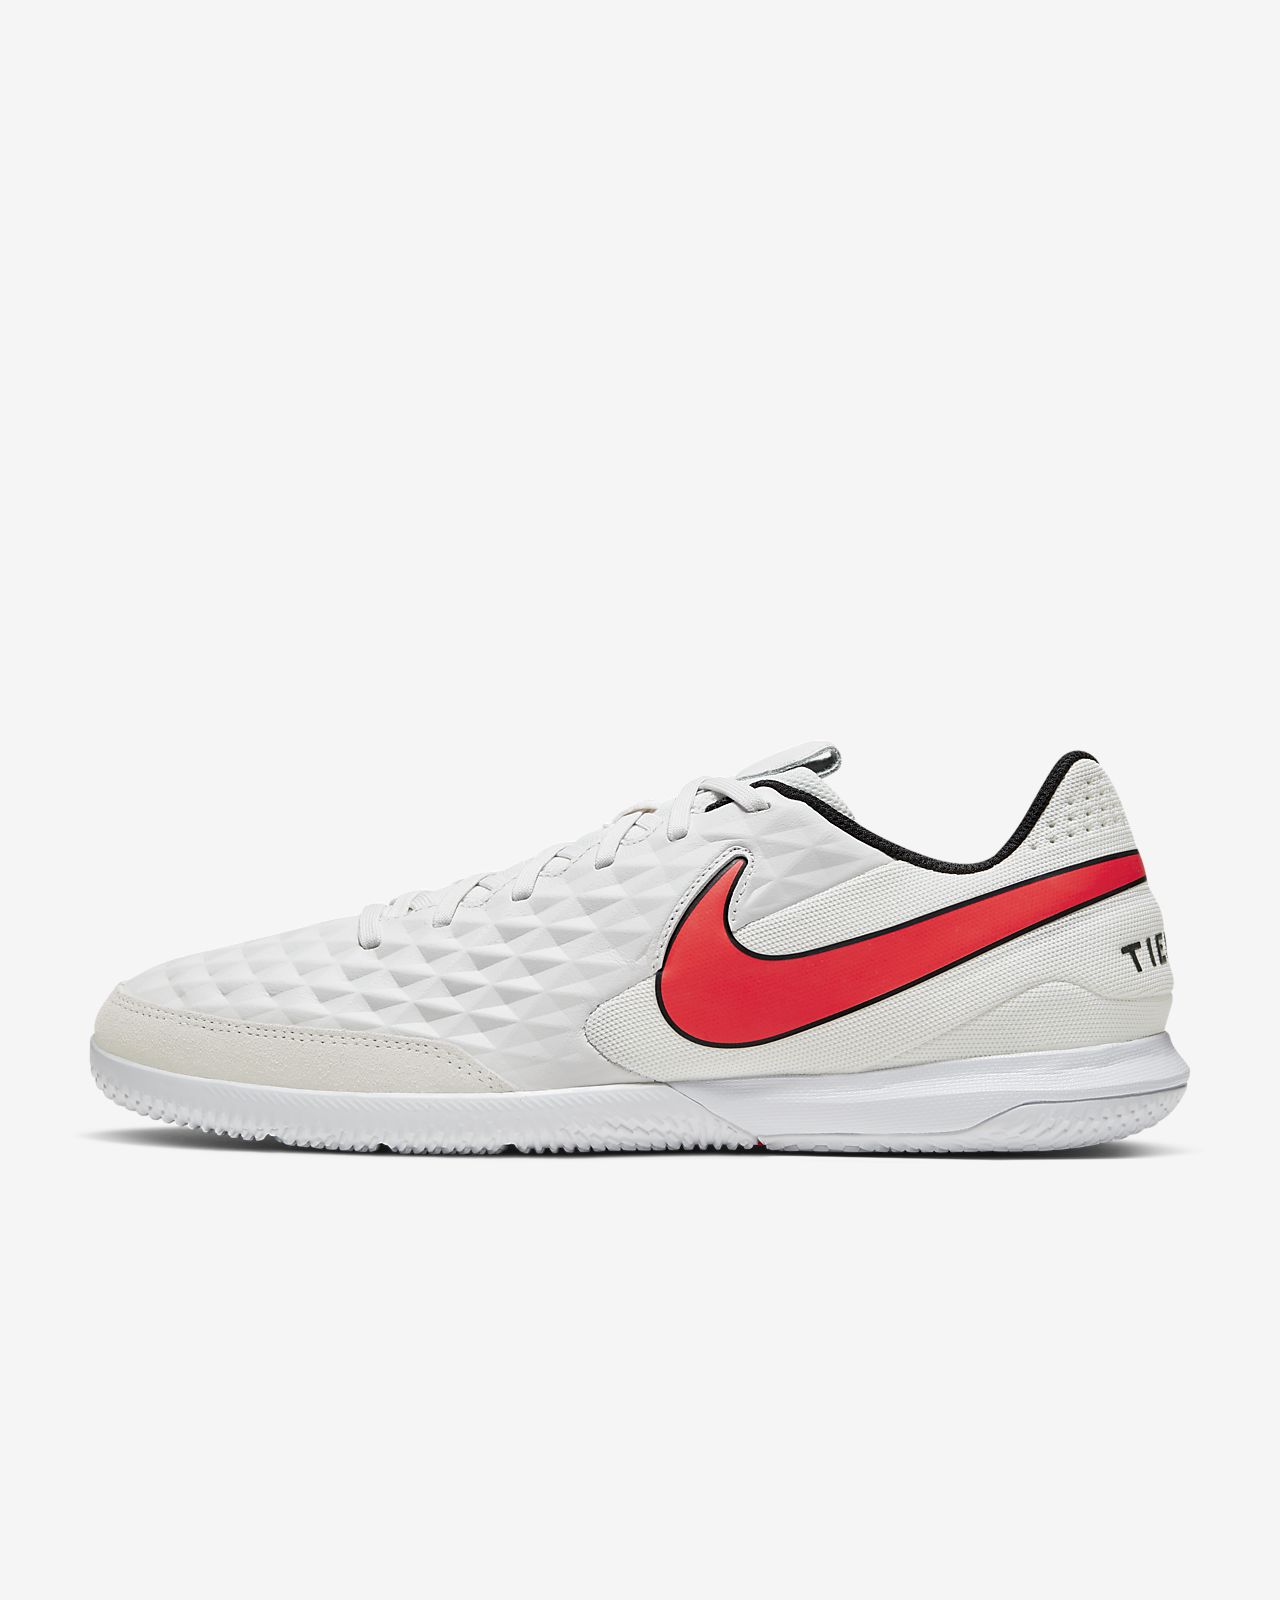 Nike Weather Legend 8 Pro Tf At6136 004 Price ‹ie.